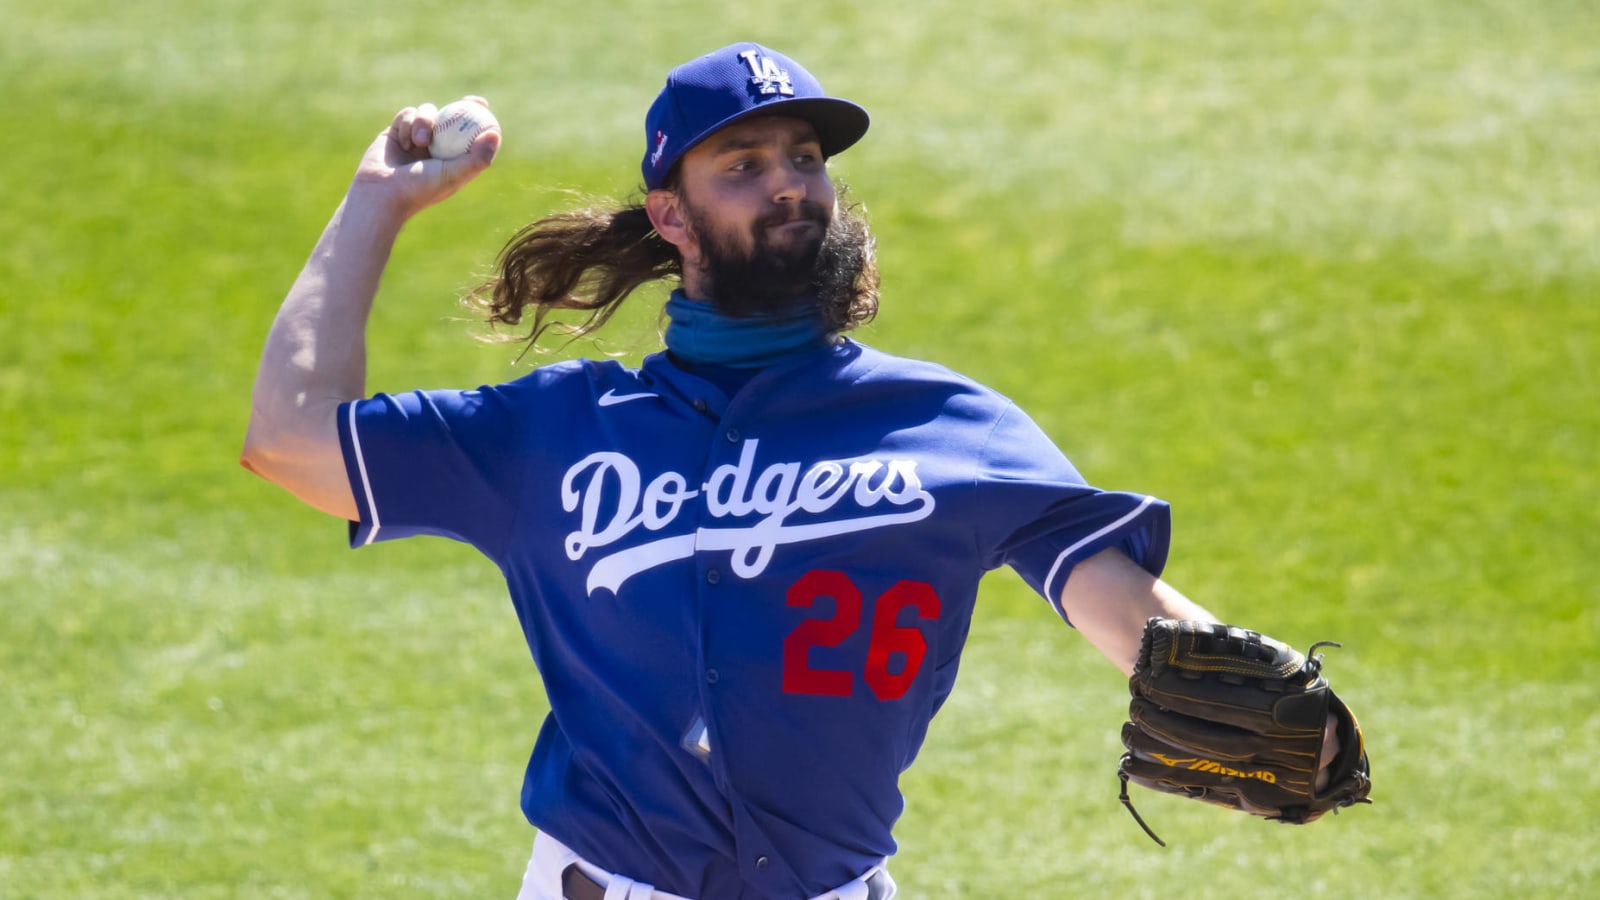 Dodgers activate RHP Tony Gonsolin from 60-day IL